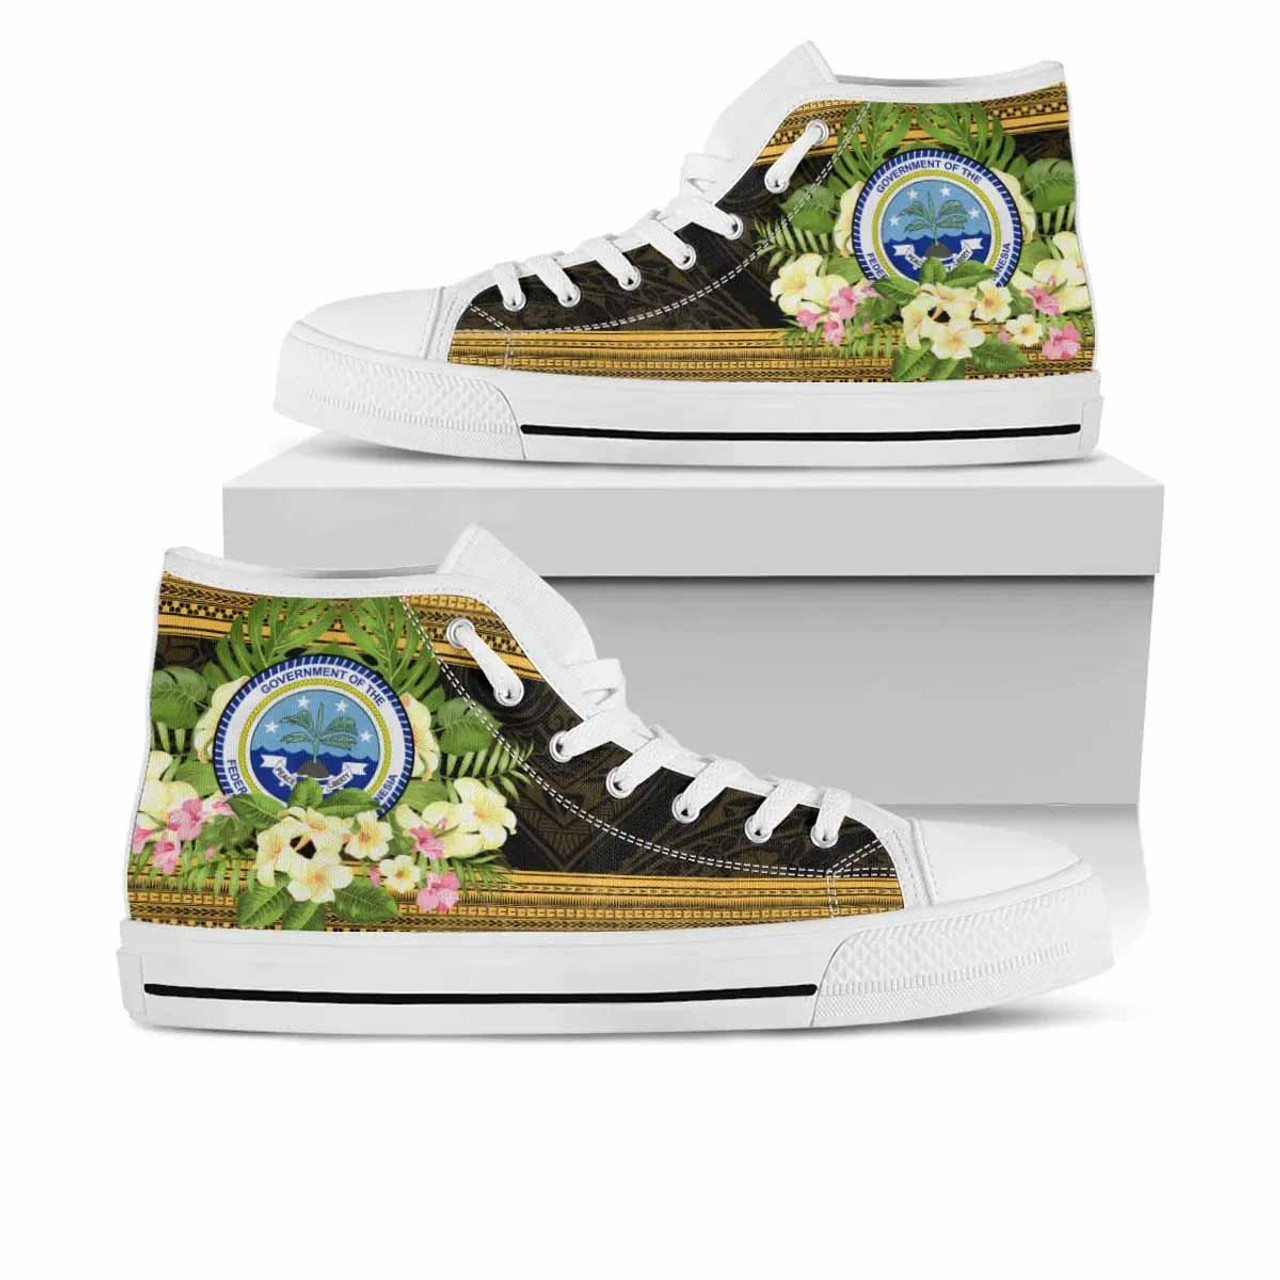 Federated States of Micronesia High Top Shoes - Polynesian Gold Patterns Collection 6